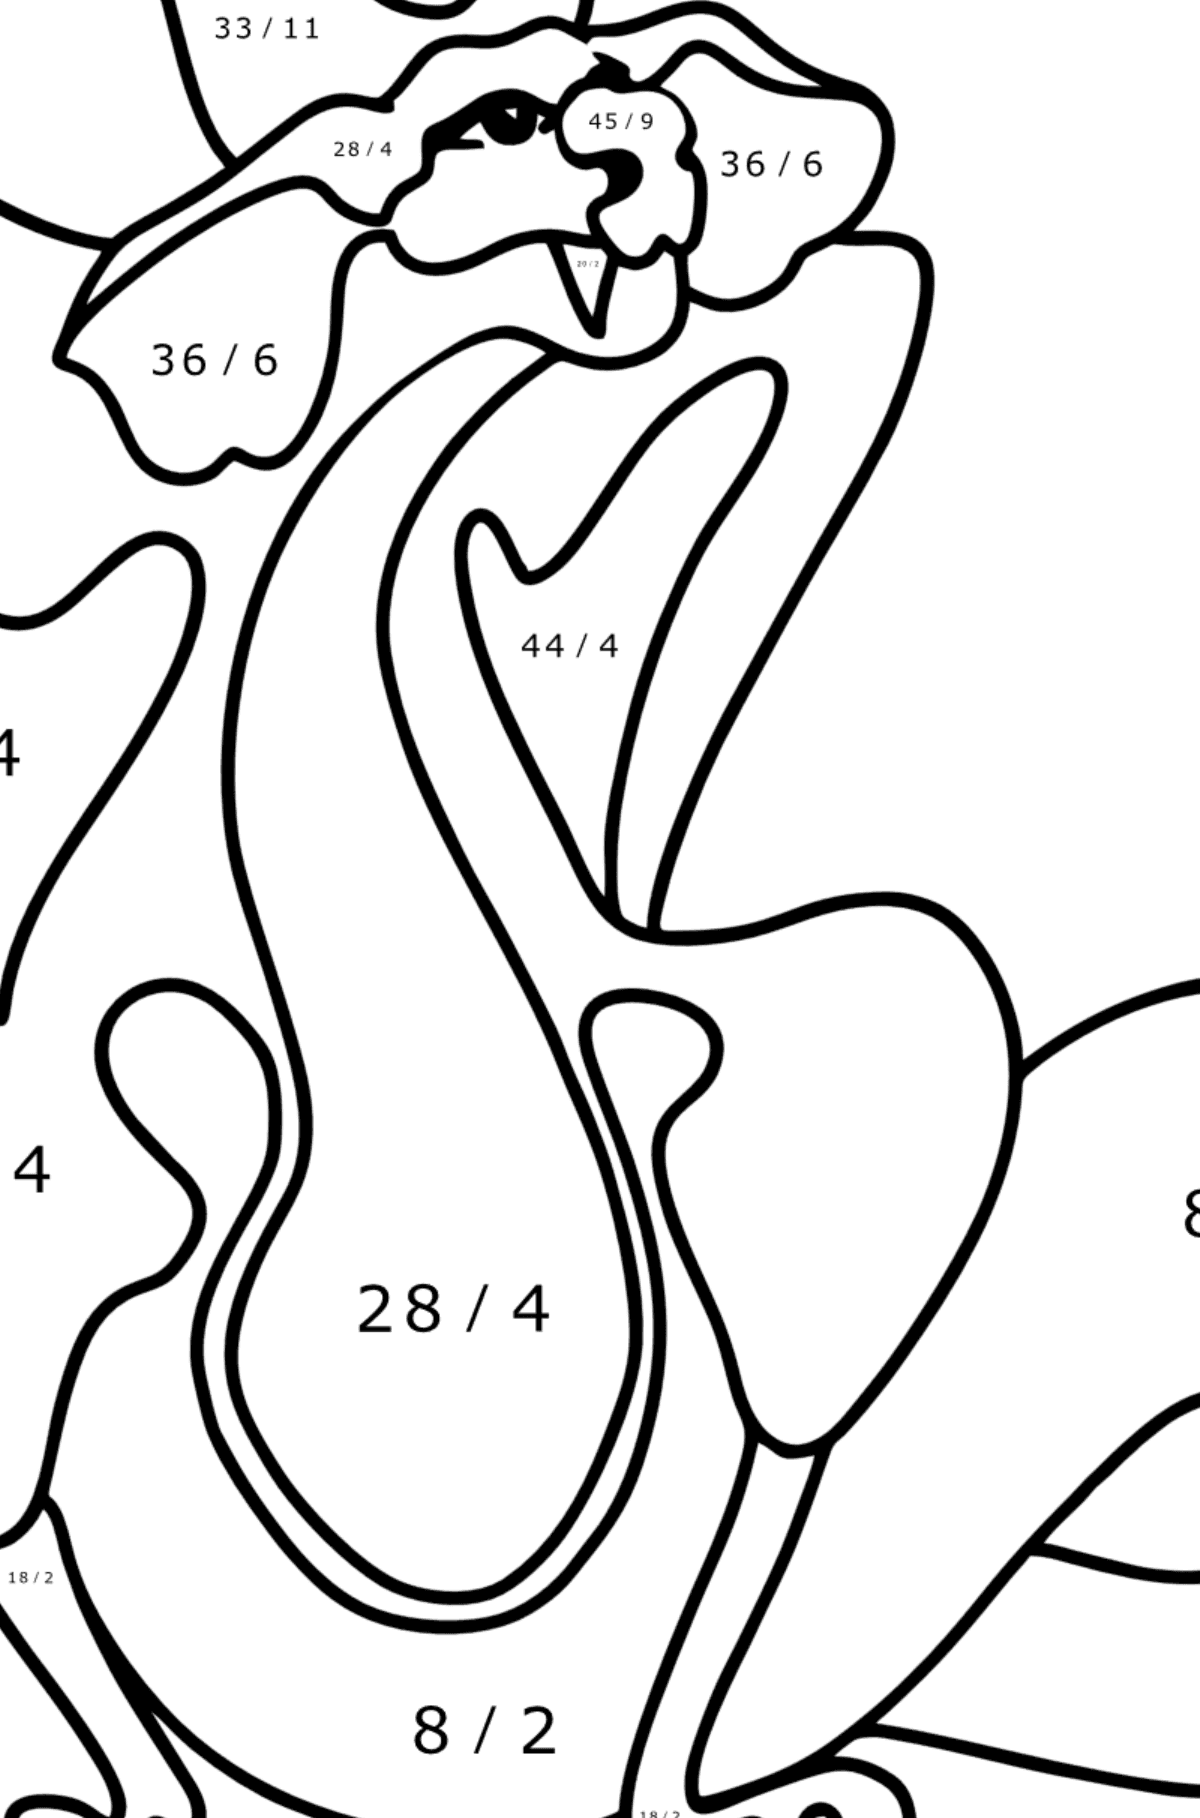 Sad Dragon coloring page - Math Coloring - Division for Kids